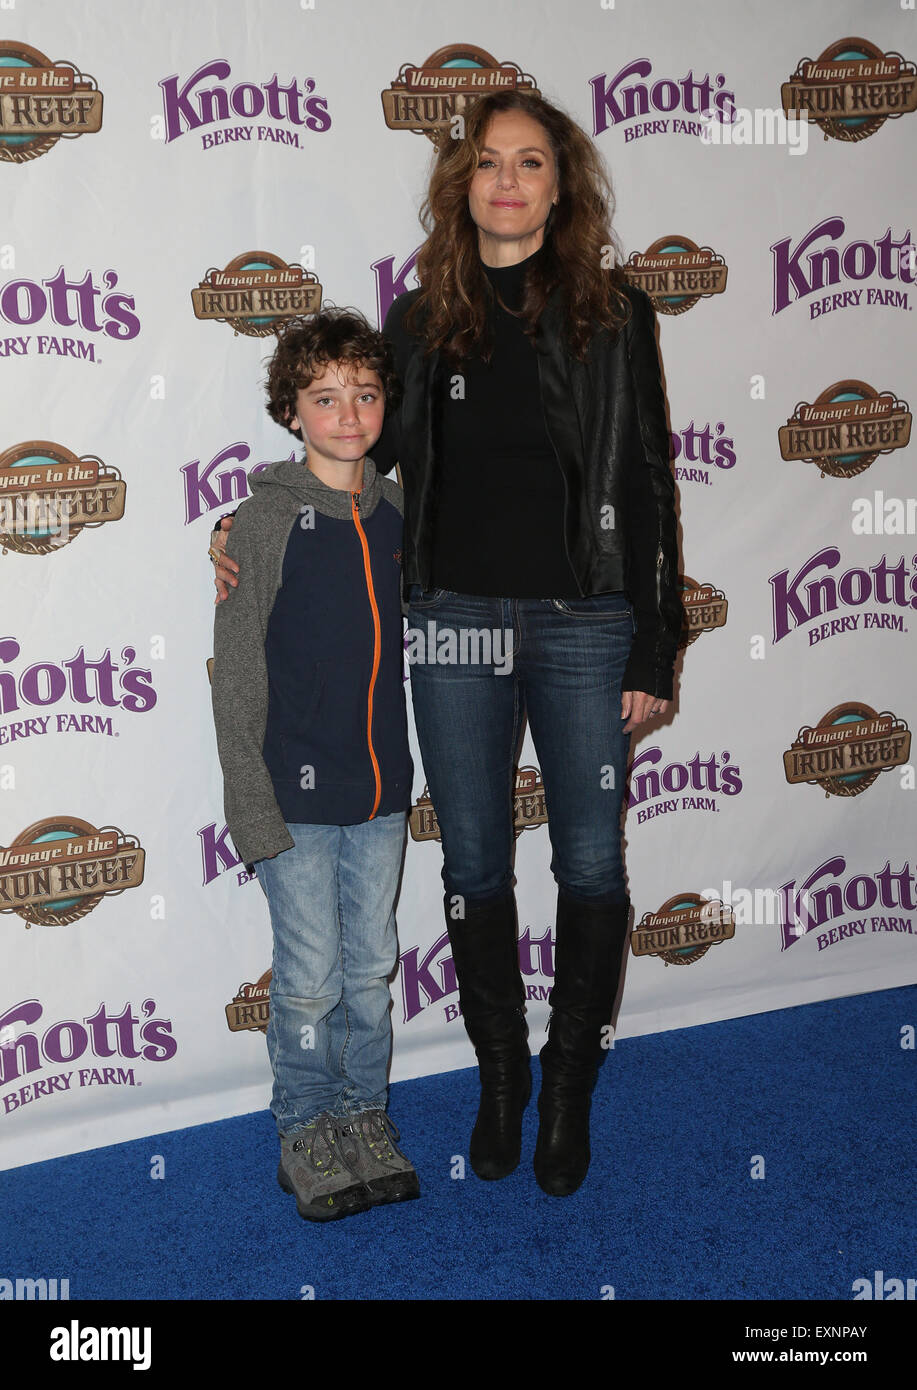 Knott's Berry Farm Celebrates The launch Of Their New Ride Voyage To The Iron Reef  Featuring: Amy Brenneman, Bodhi Russell Silberling Where: Buena Park, California, United States When: 14 May 2015 Stock Photo